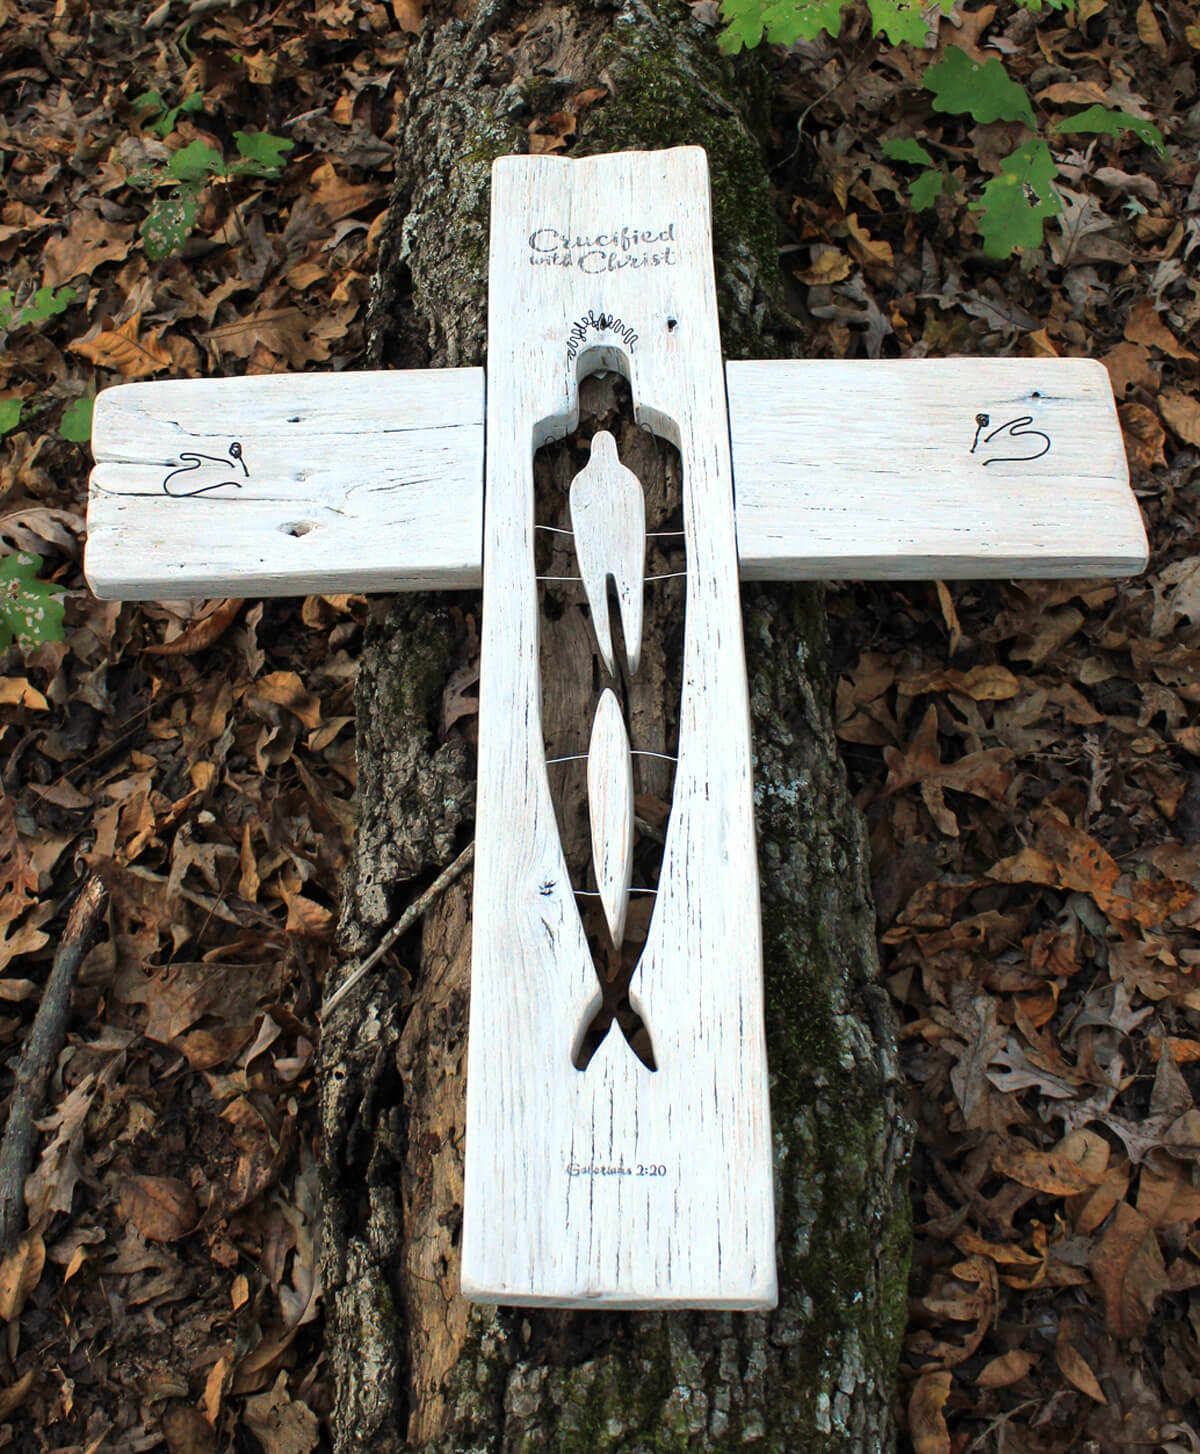 One of the "In Christ" sculptures set on an old oak log.